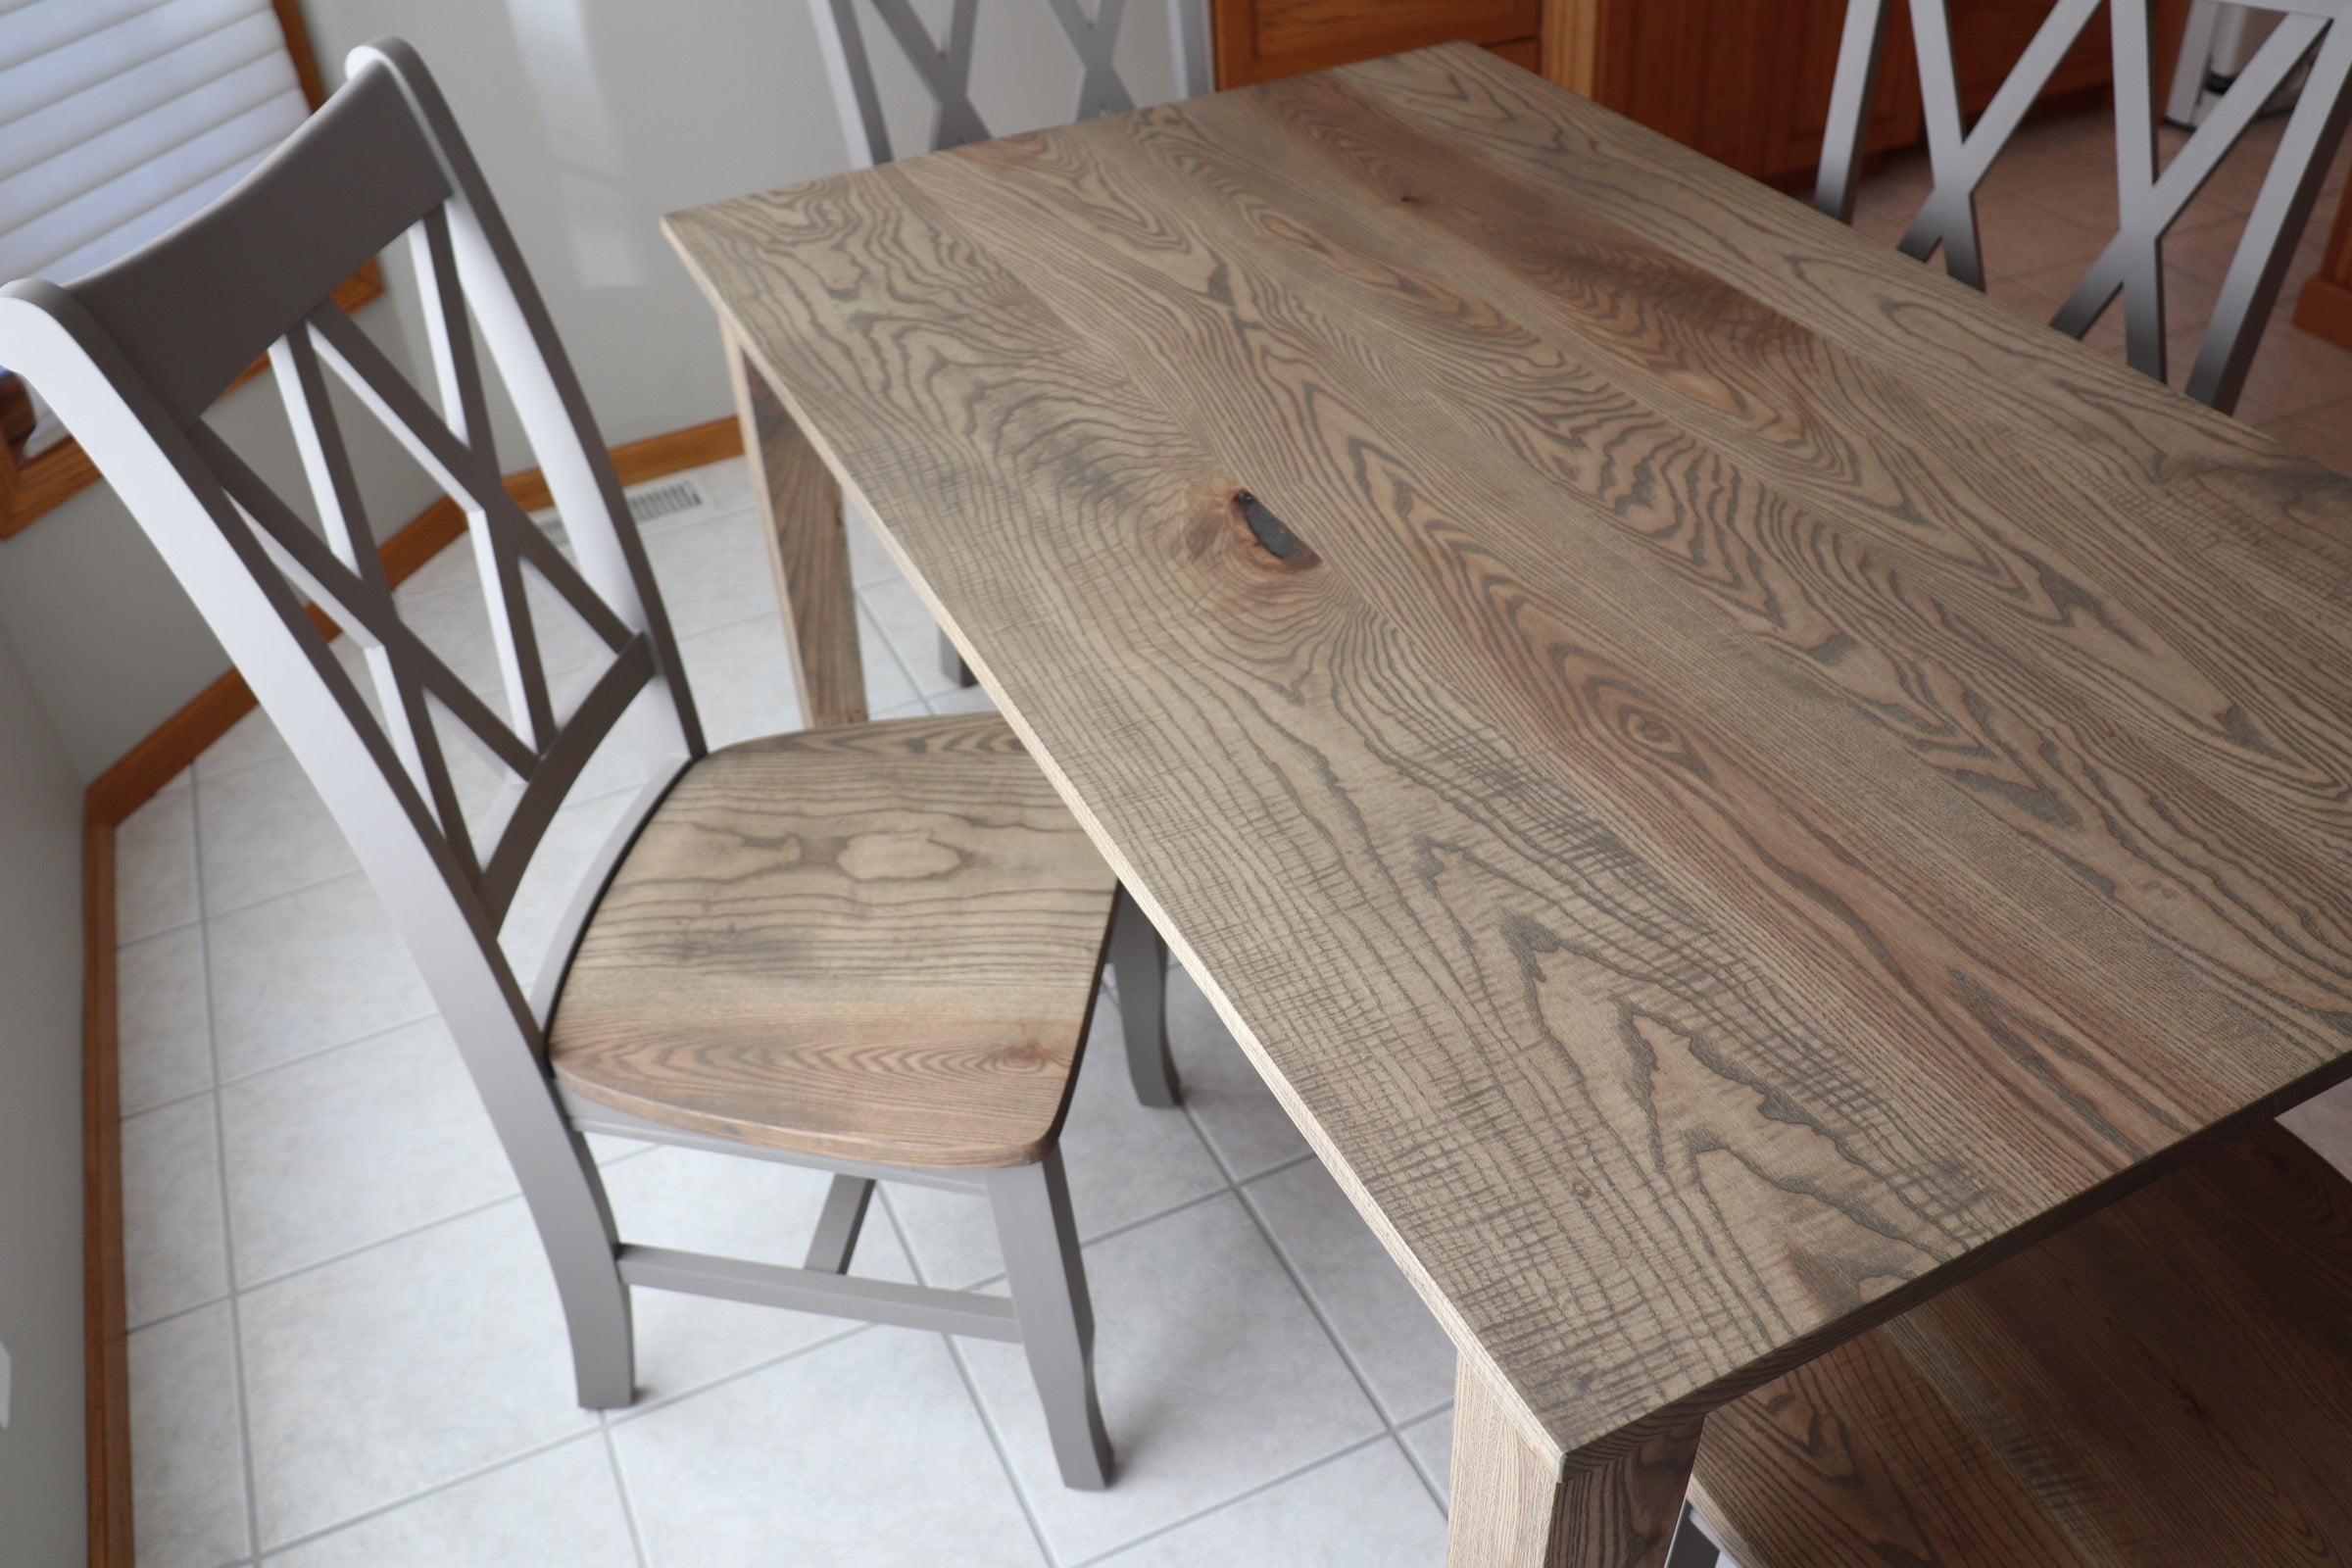 Ash Table and Chair set with tapered legs